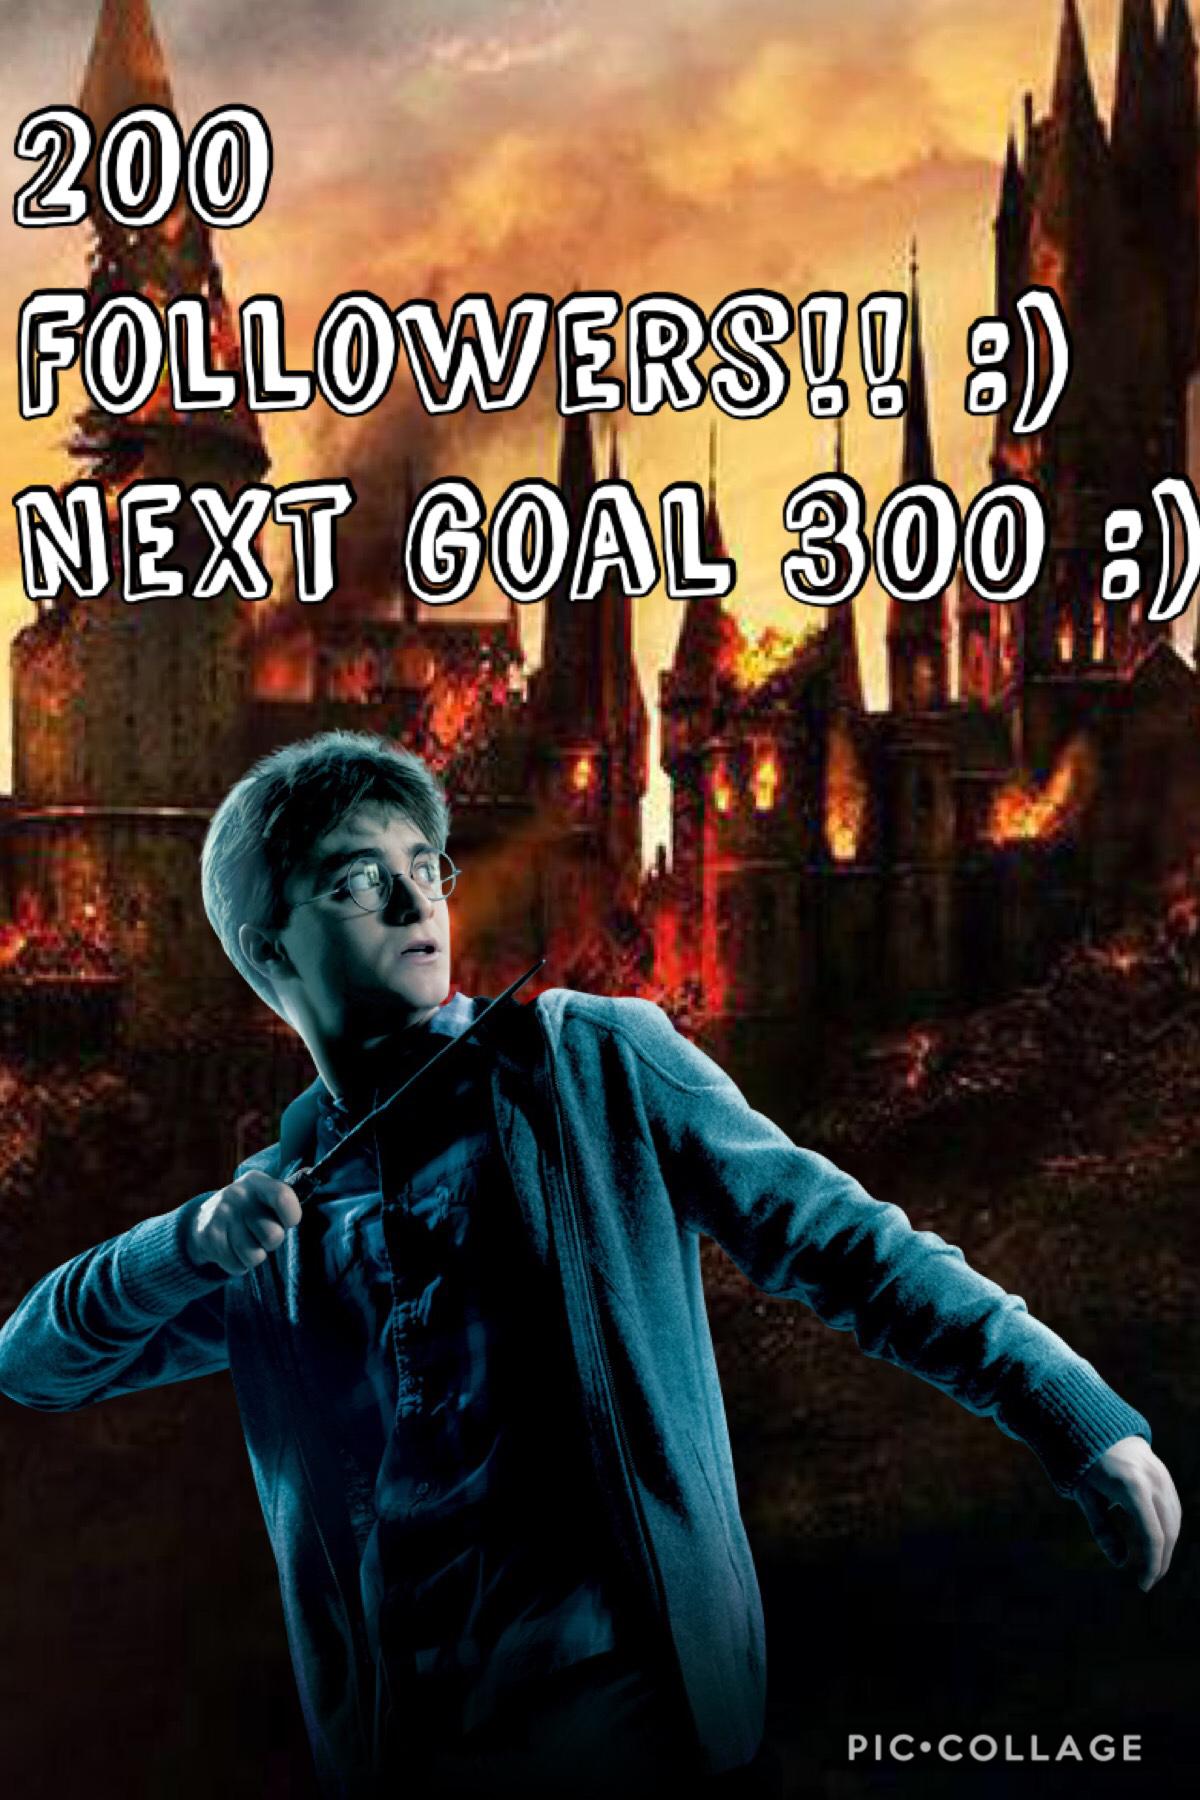 Next goal 300! Thanks so much guys, I love you guys!!